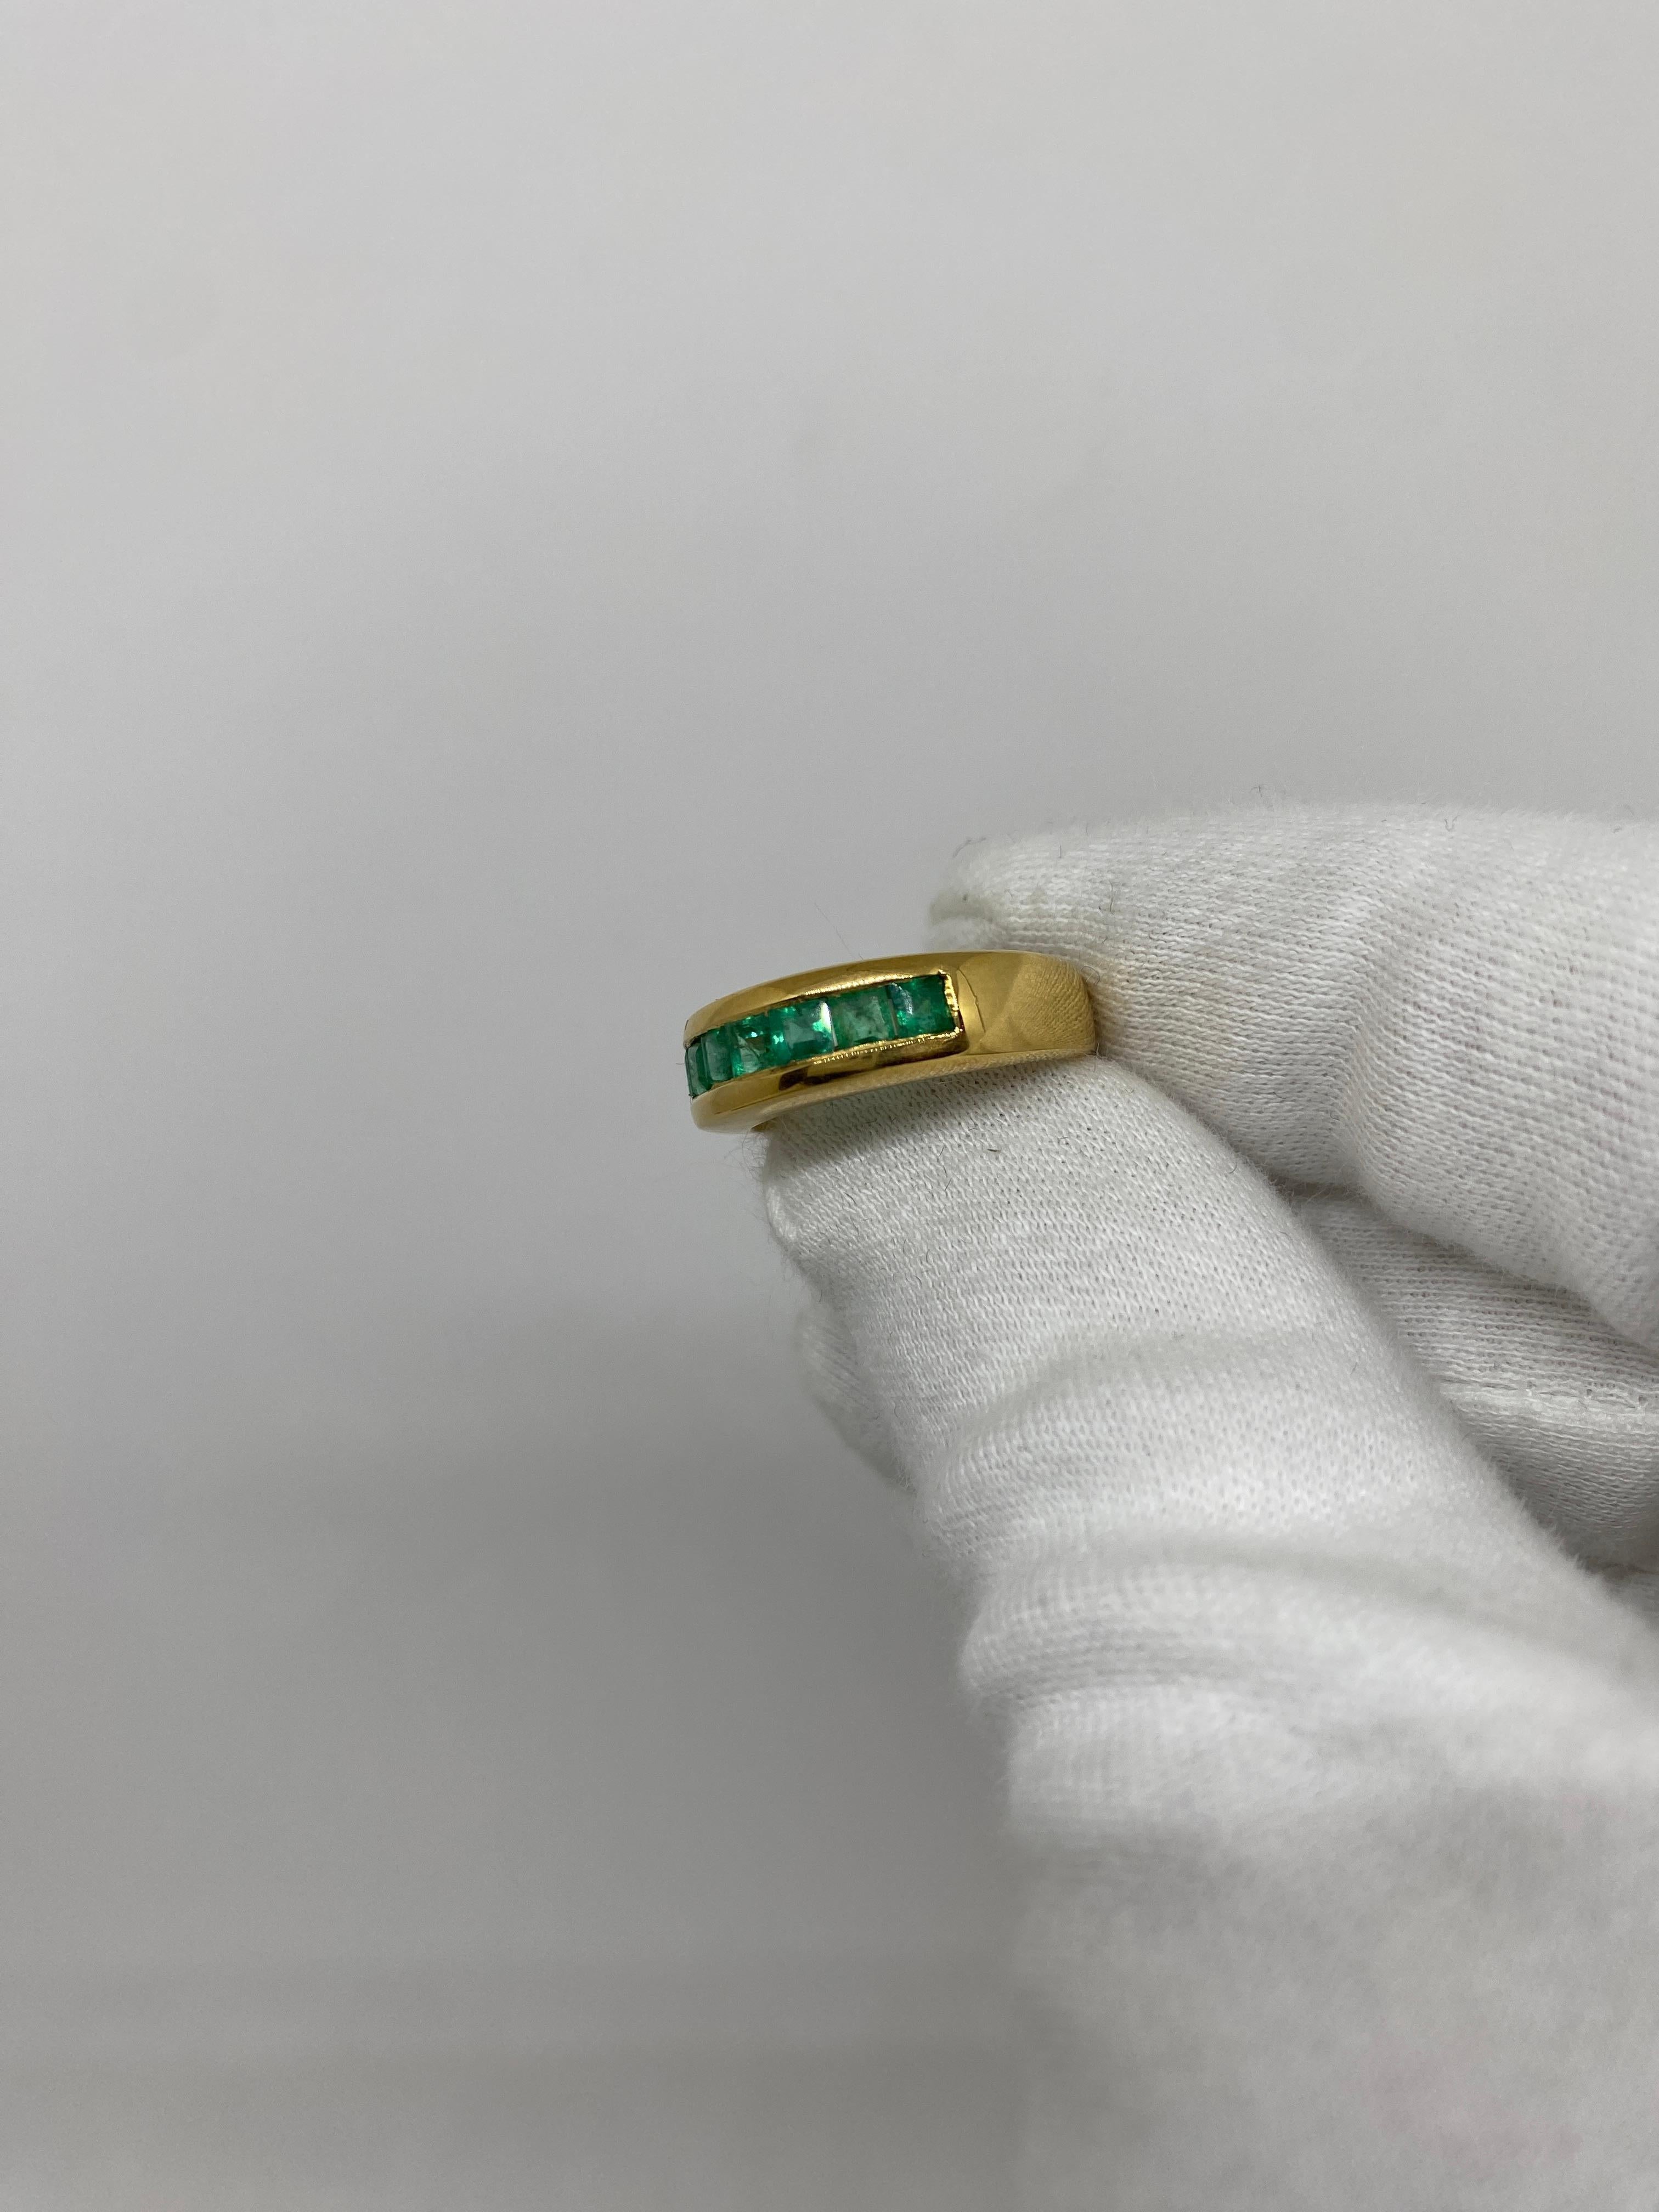 Band ring made of 18kt yellow gold with natural carré-cut emeralds

Welcome to our jewelry collection, where every piece tells a story of timeless elegance and unparalleled craftsmanship. As a family-run business in Italy for over 100 years, we